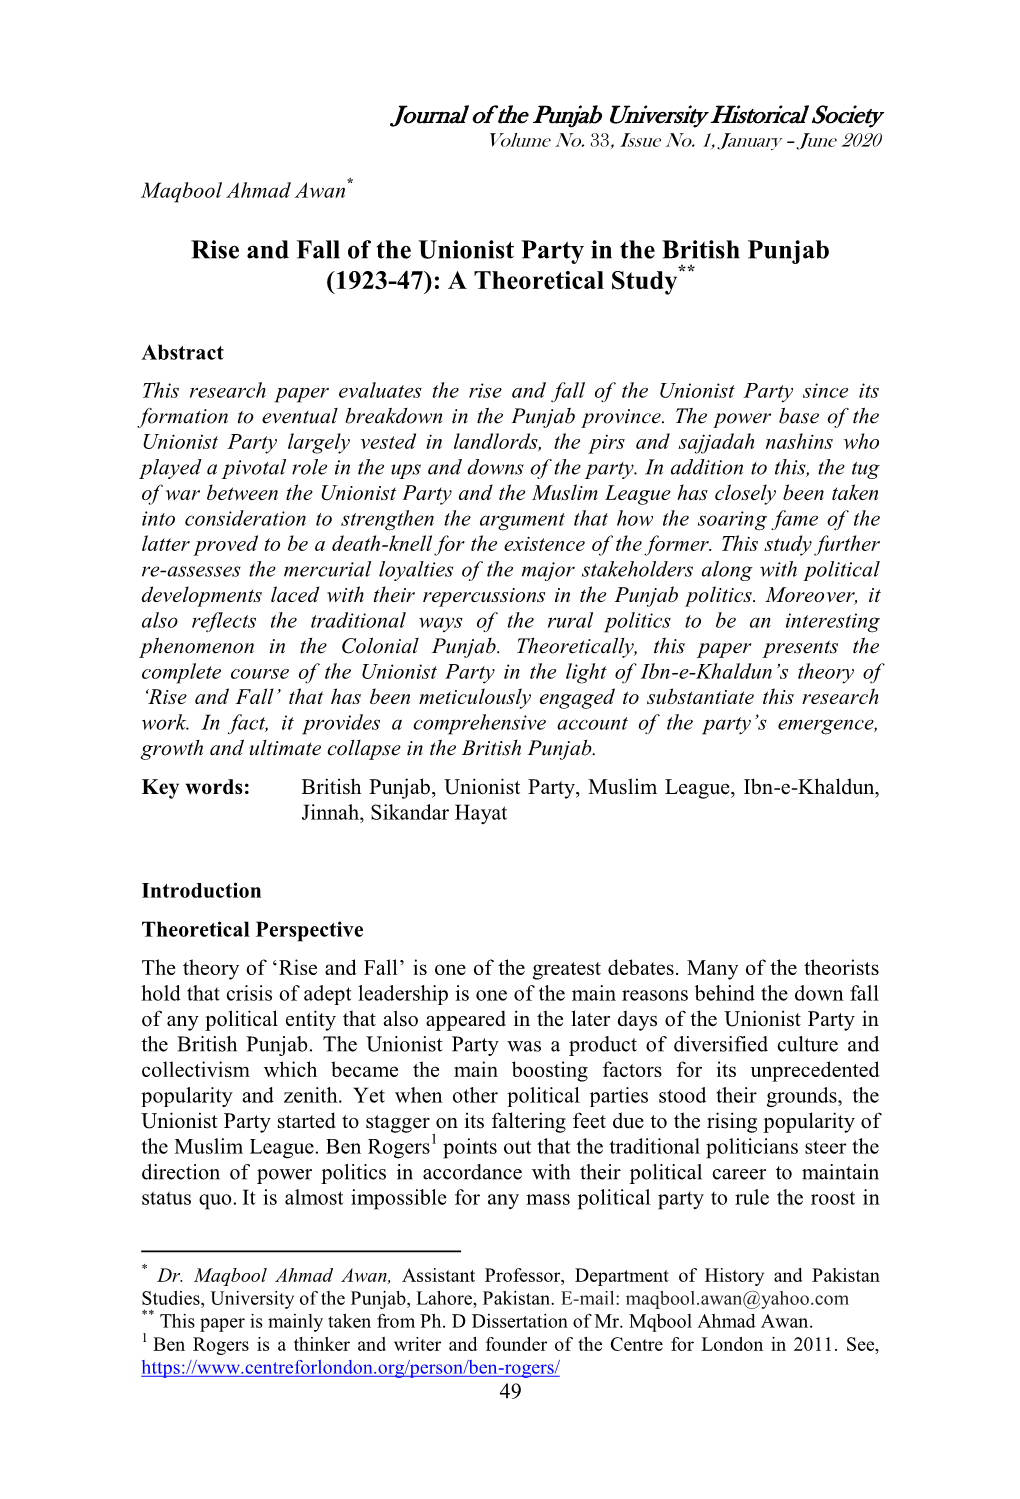 Rise and Fall of the Unionist Party in the British Punjab (1923-47): a Theoretical Study**